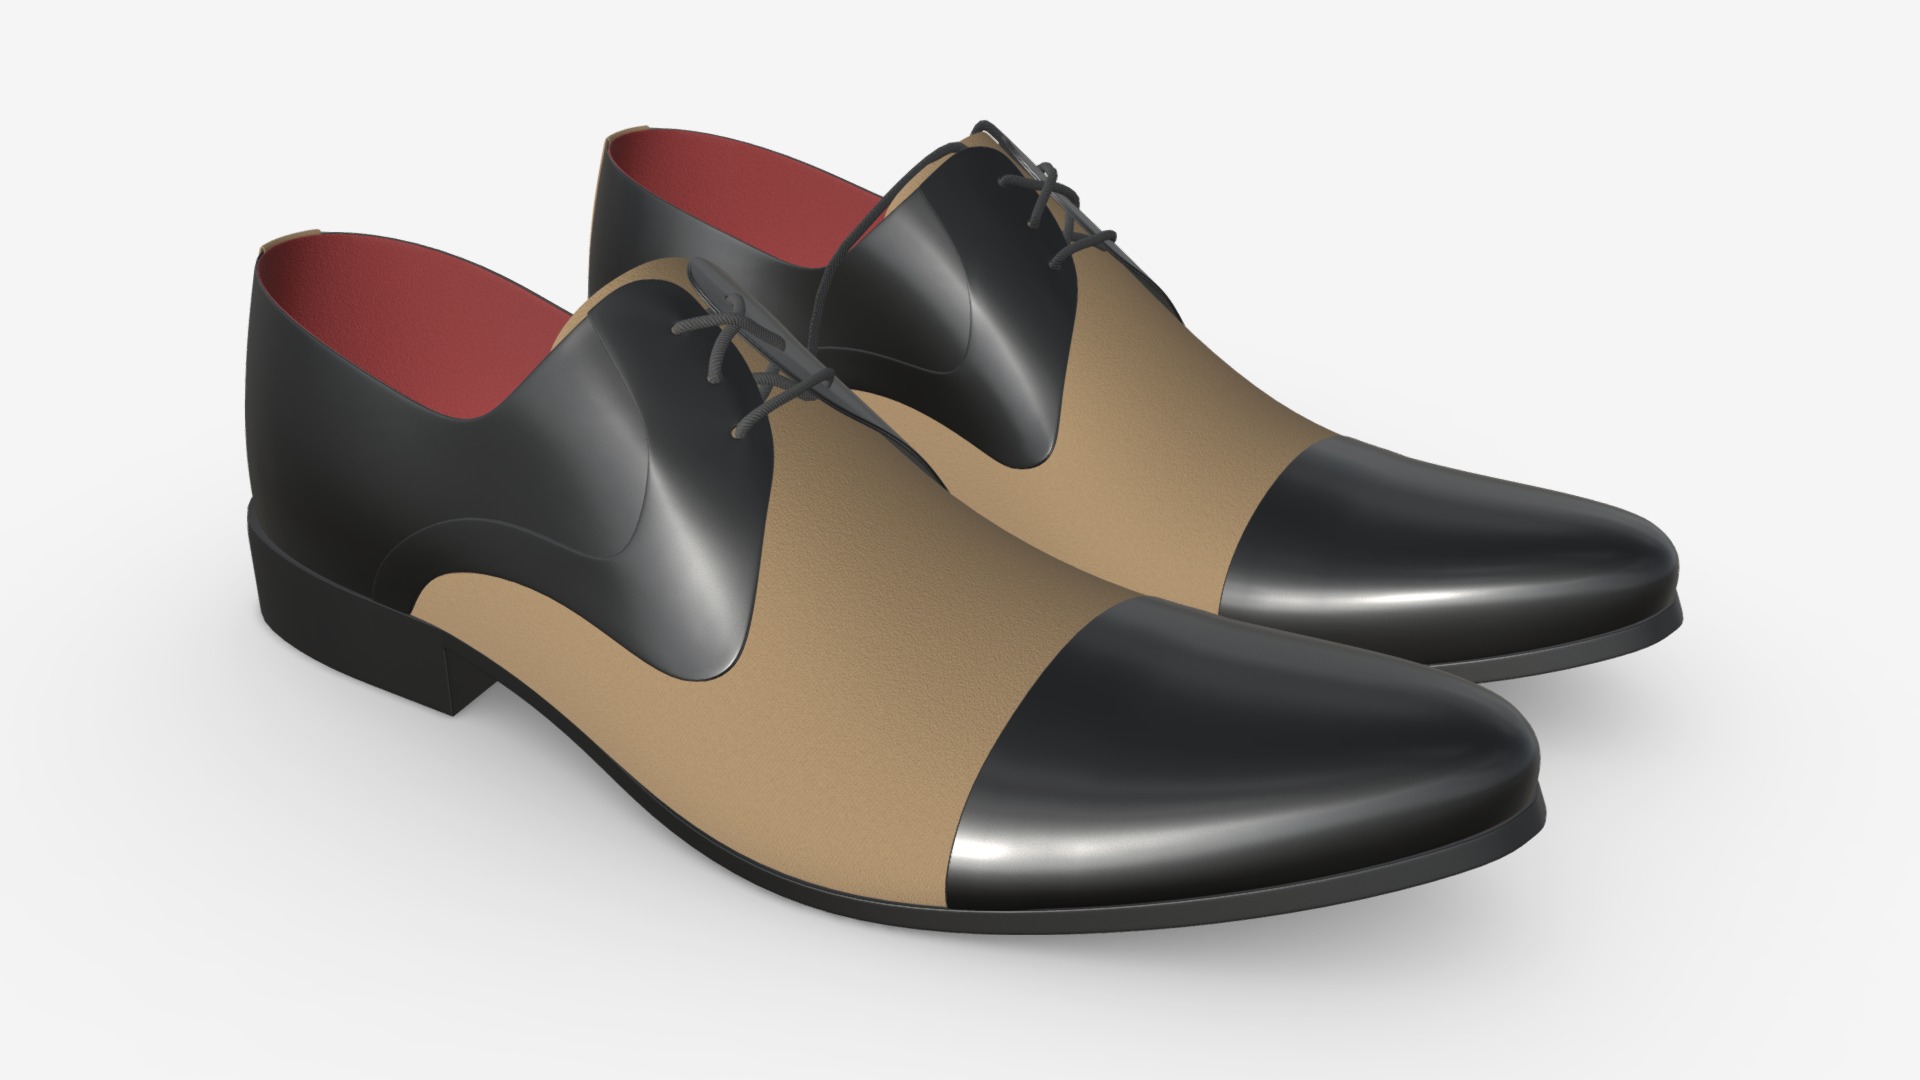 3D model Mens classic shoes 08 - This is a 3D model of the Mens classic shoes 08. The 3D model is about a pair of black and red sandals.